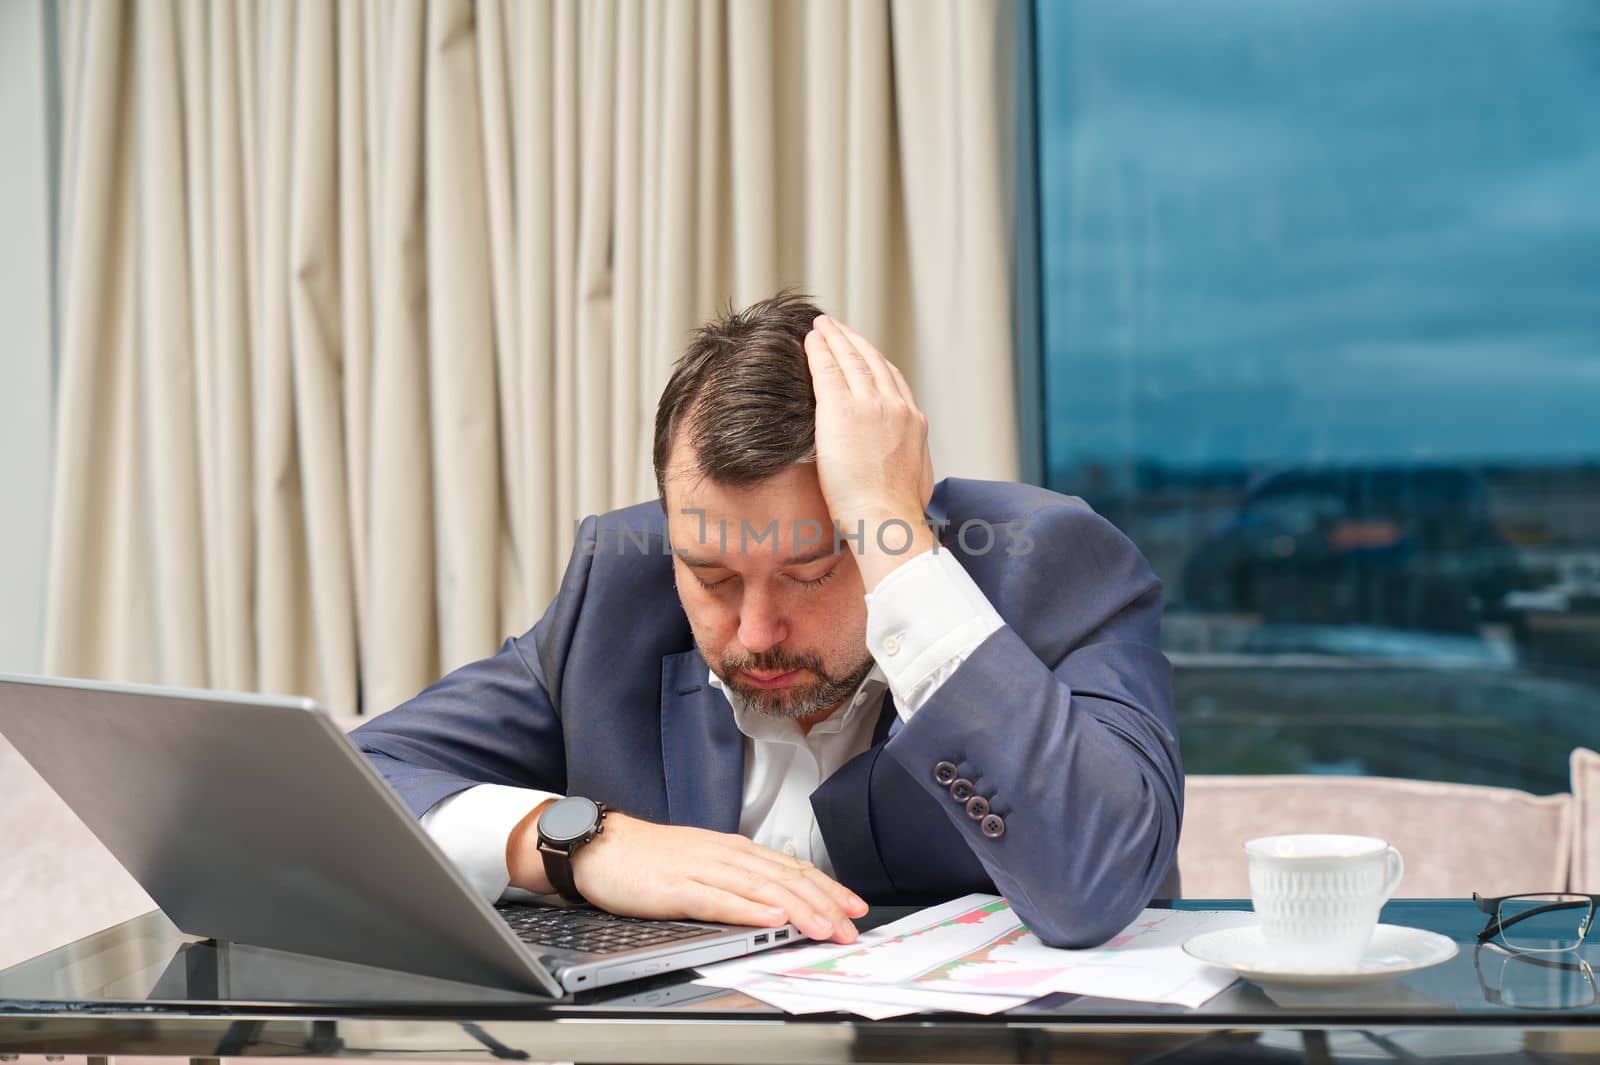 Tired man working at home office, Exhausted, stressed, overworked man, financial market decline, unsuccessful investments. tension headache. Sad businessman lying on laptop.